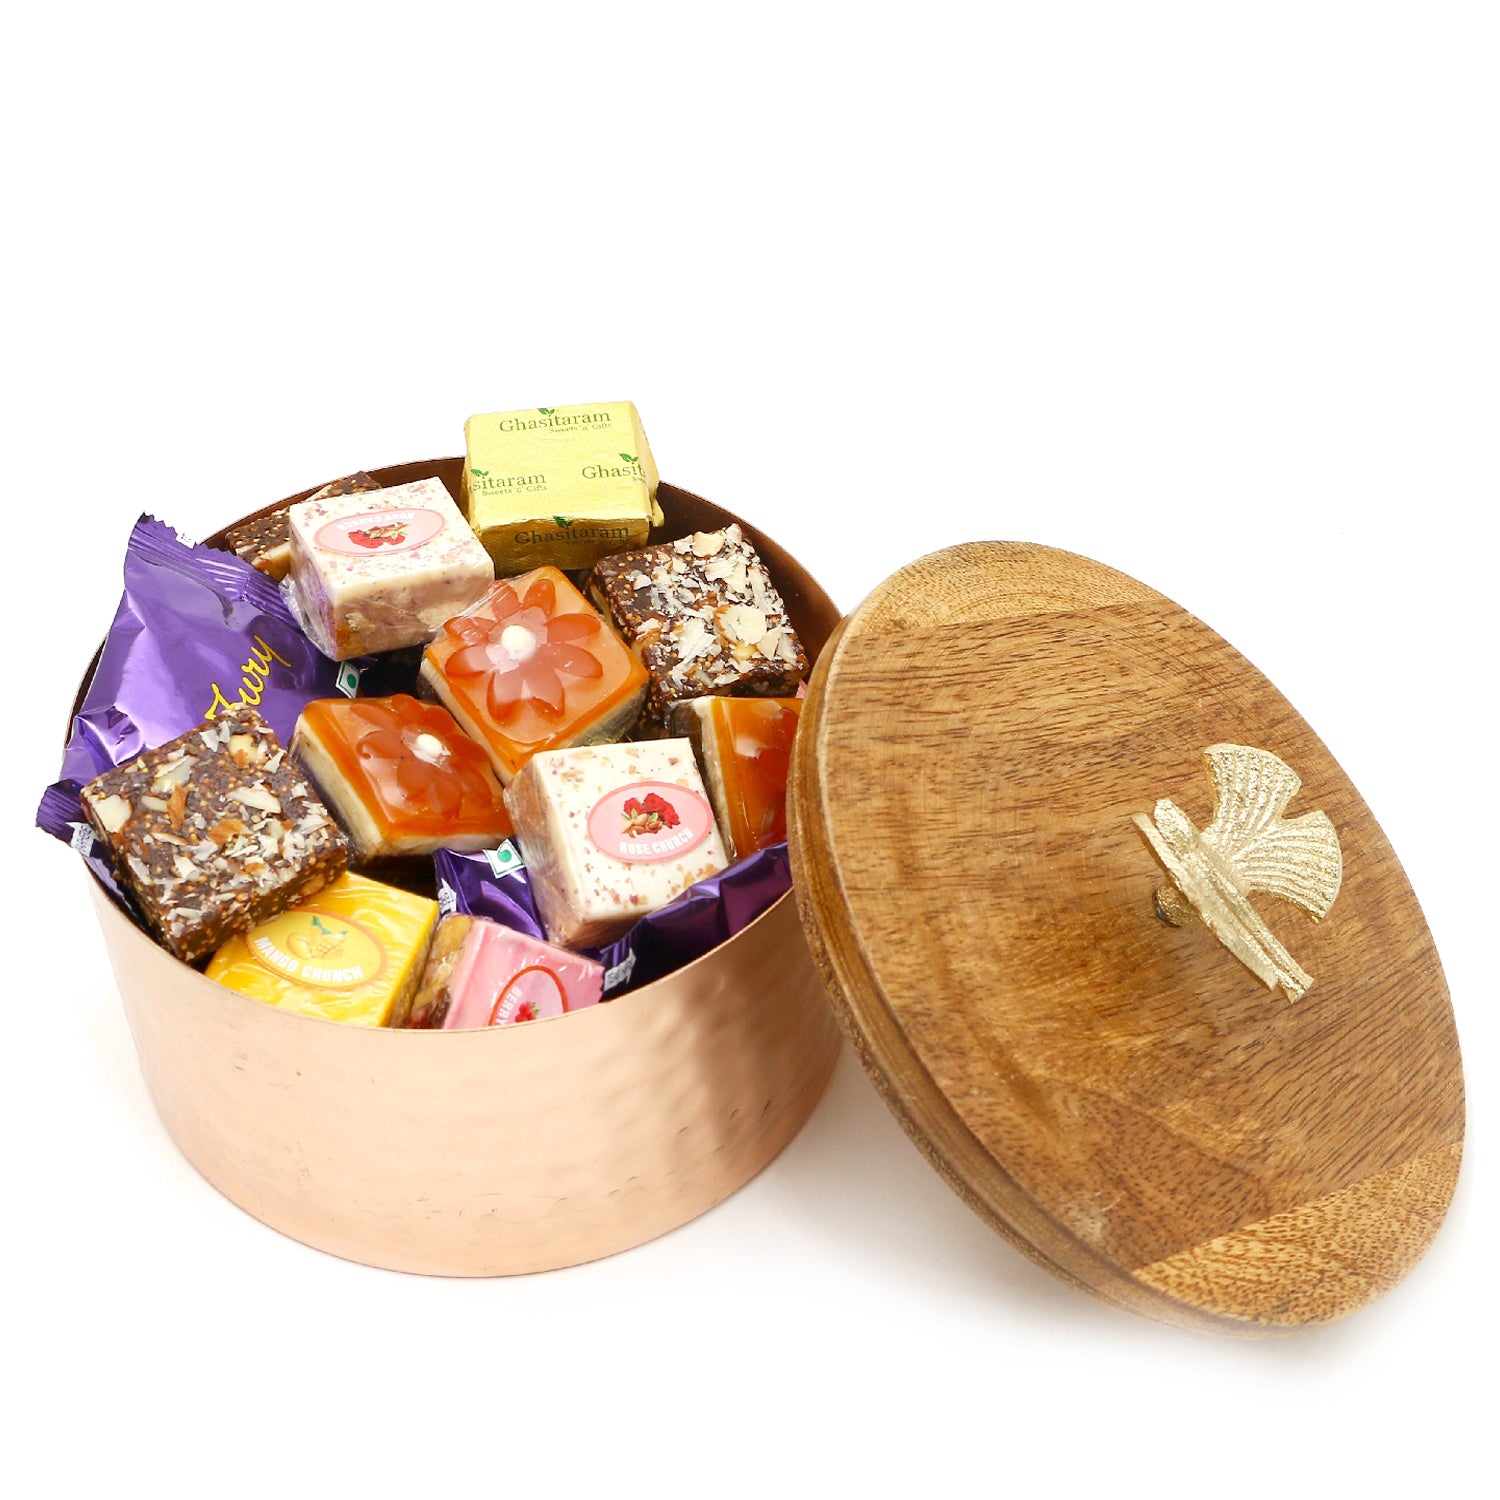 Diwali Gift Dilemma: Indian Sweets or Chocolates?